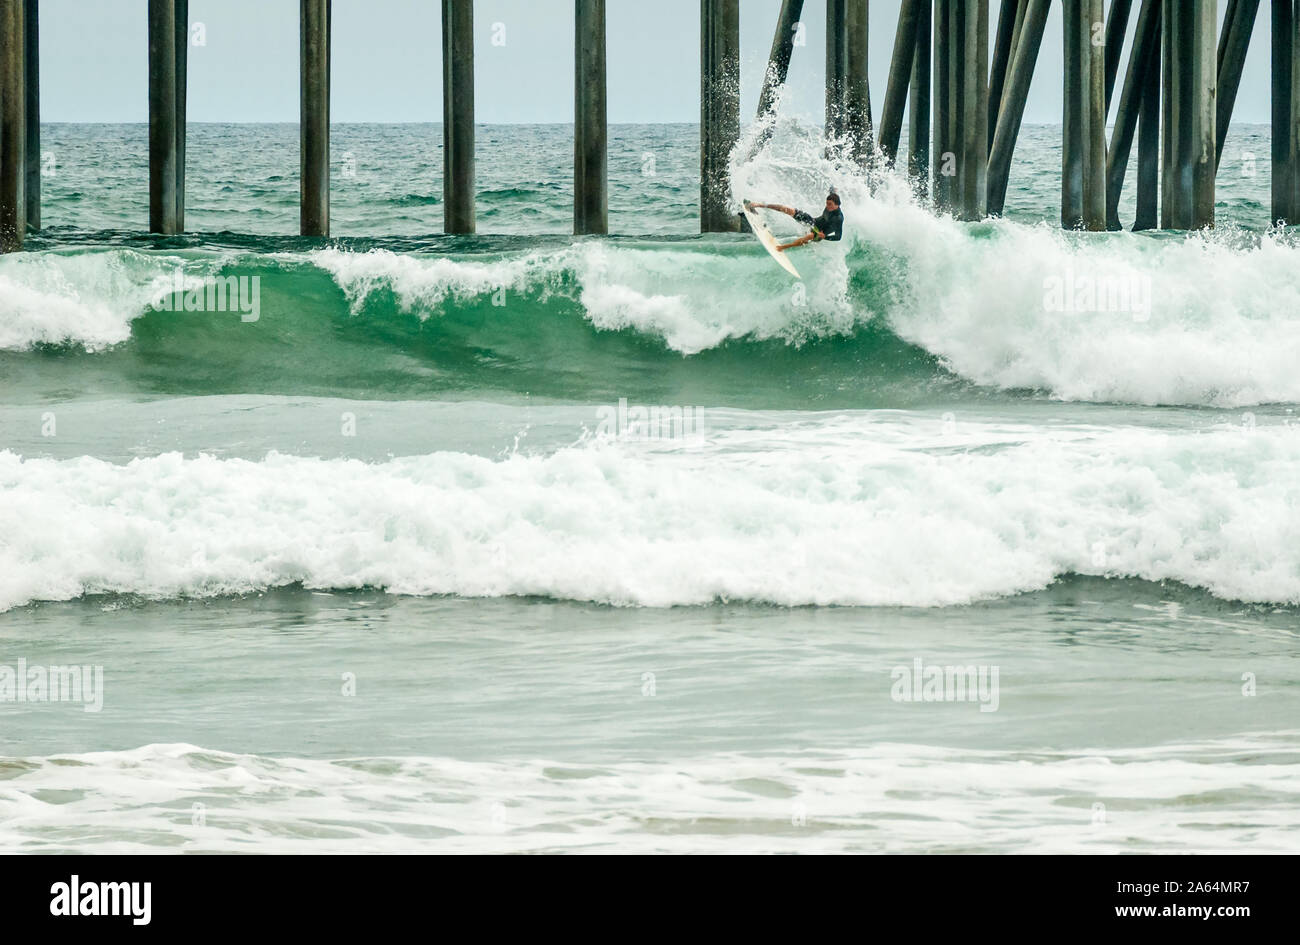 Experienced surfer shredding a large wave at Huntington Beach, California, also known as Surf City USA, home of the U.S. Open of Surfing. Stock Photo